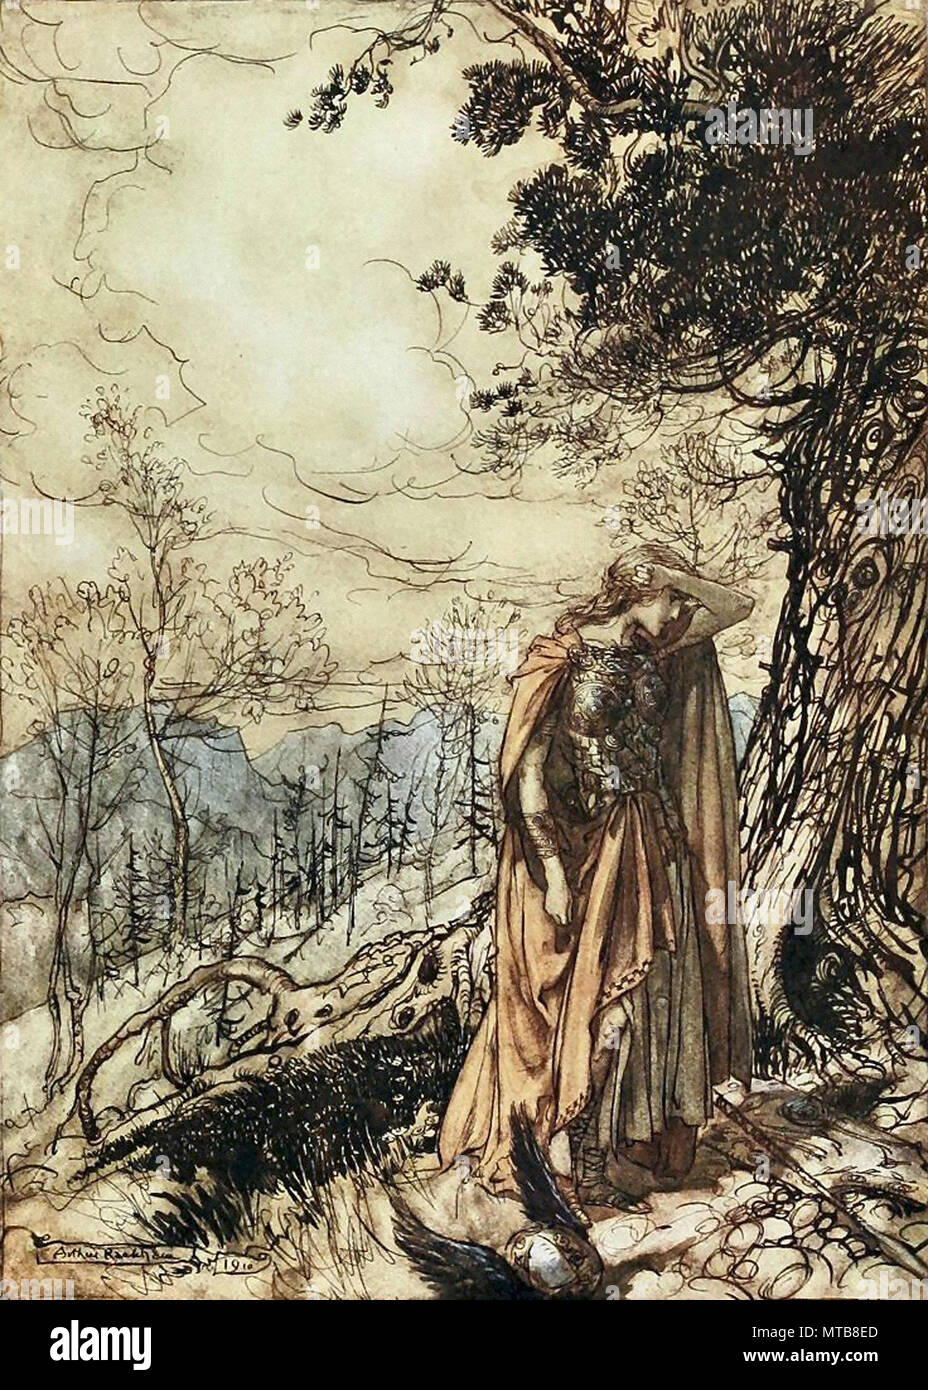 Rackham Arthur - the Ring of the Nibelung 26 - Brunnhilde Stands for a Long Time Dazed and Alarmed Stock Photo